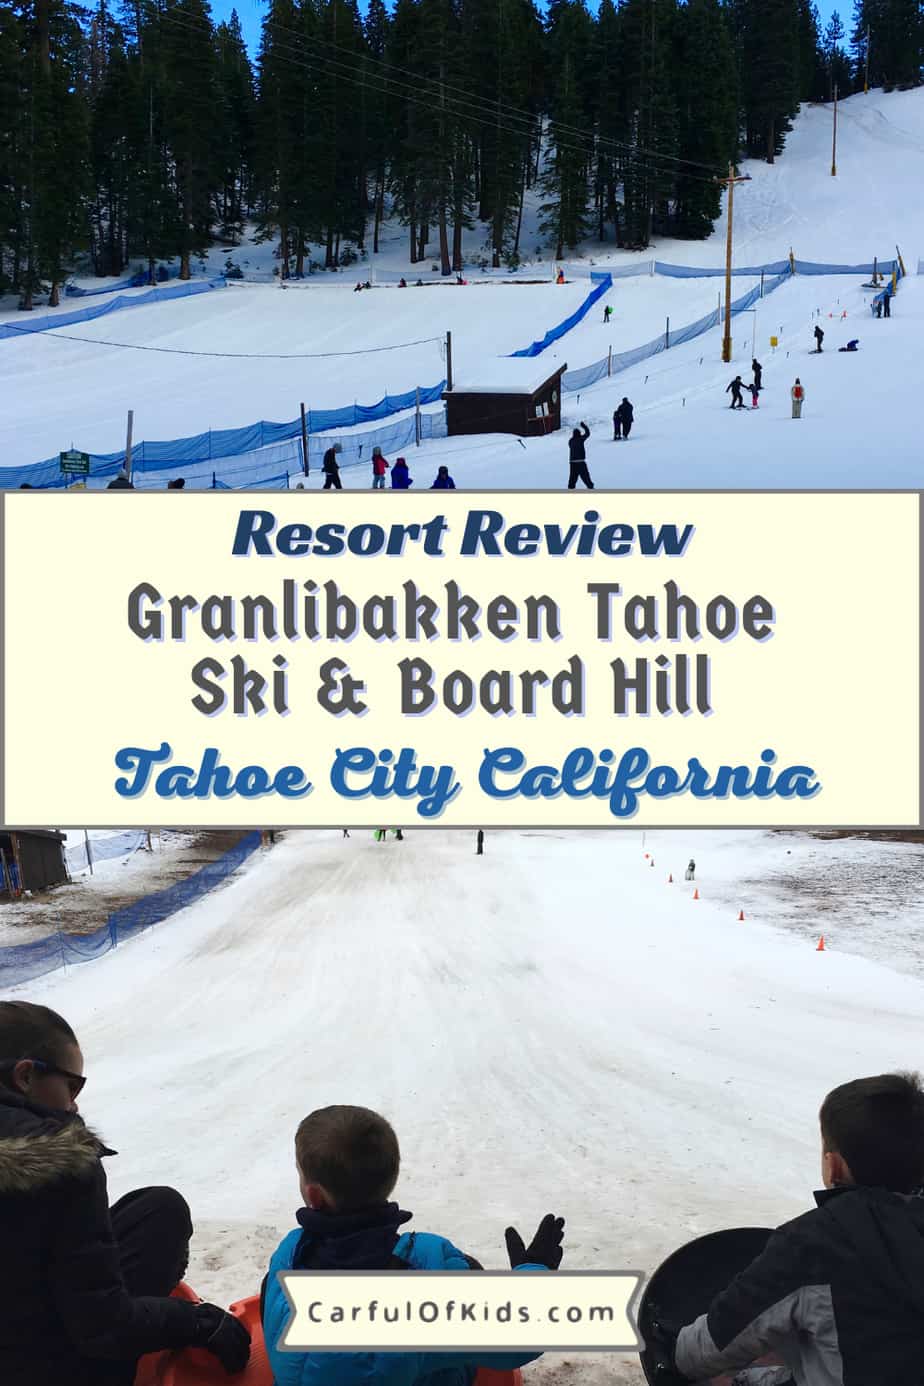 Granlibakken Tahoe Ski Resort offers a secluded location on the western shores of Lake Tahoe, minutes from Tahoe City, California. Find a fast sledding hill along with a beginner and intermediate ski lift. Perfect for families since kids can ski or sled while parents watch on. Find out all the family ski details along with its affordable prices. Where to sled near Lake Tahoe | Inexpensive ski resort at Lake Tahoe | Small Ski Resort at Lake Tahoe #LakeTahoe #Calfornia 